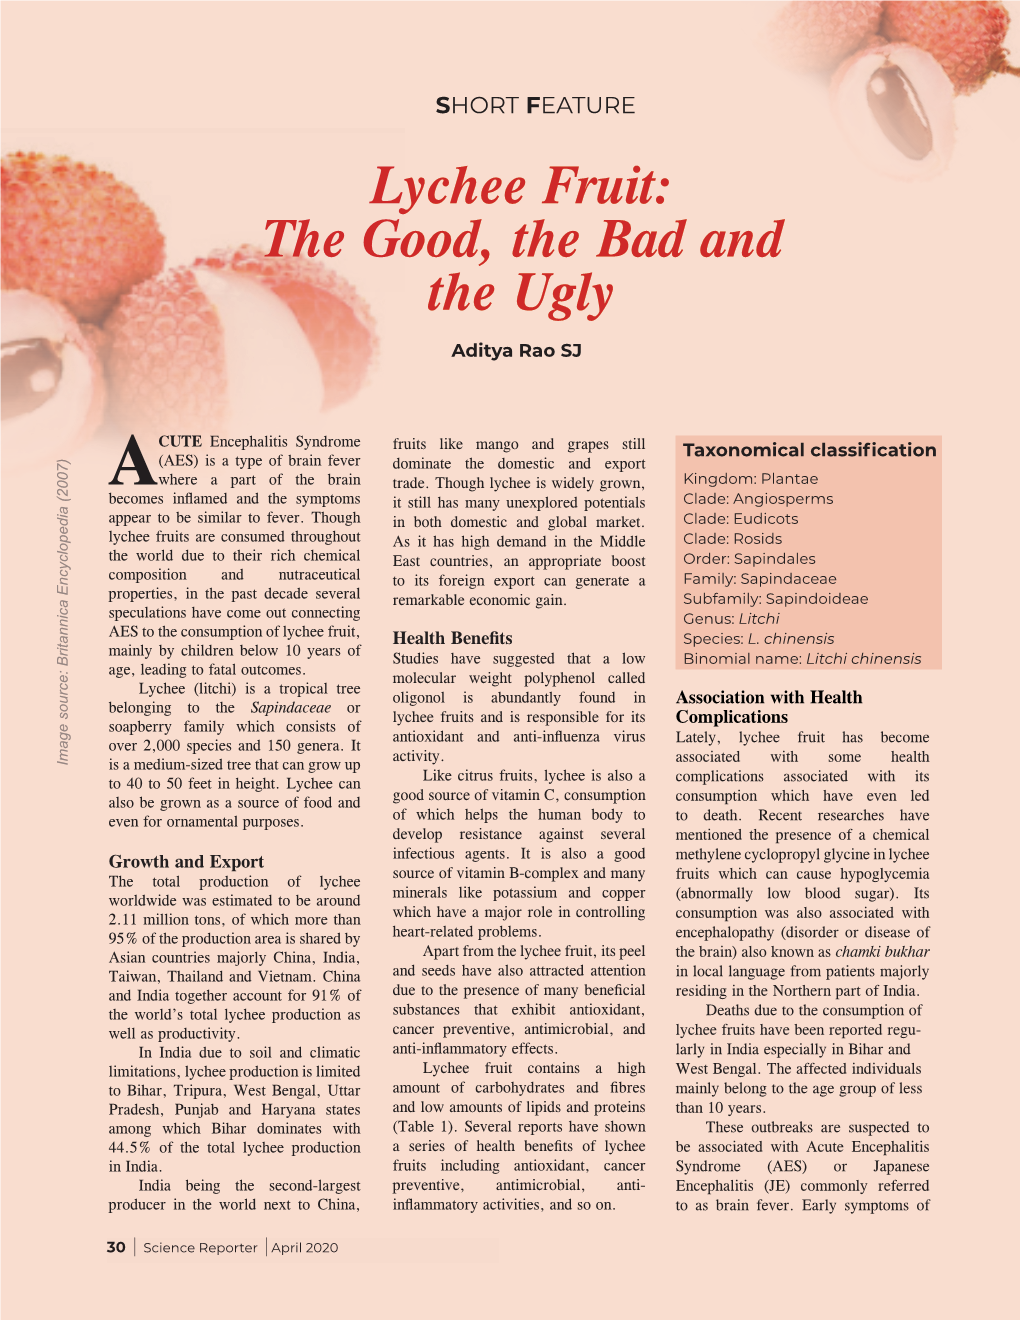 Lychee Fruit: the Good, the Bad and the Ugly